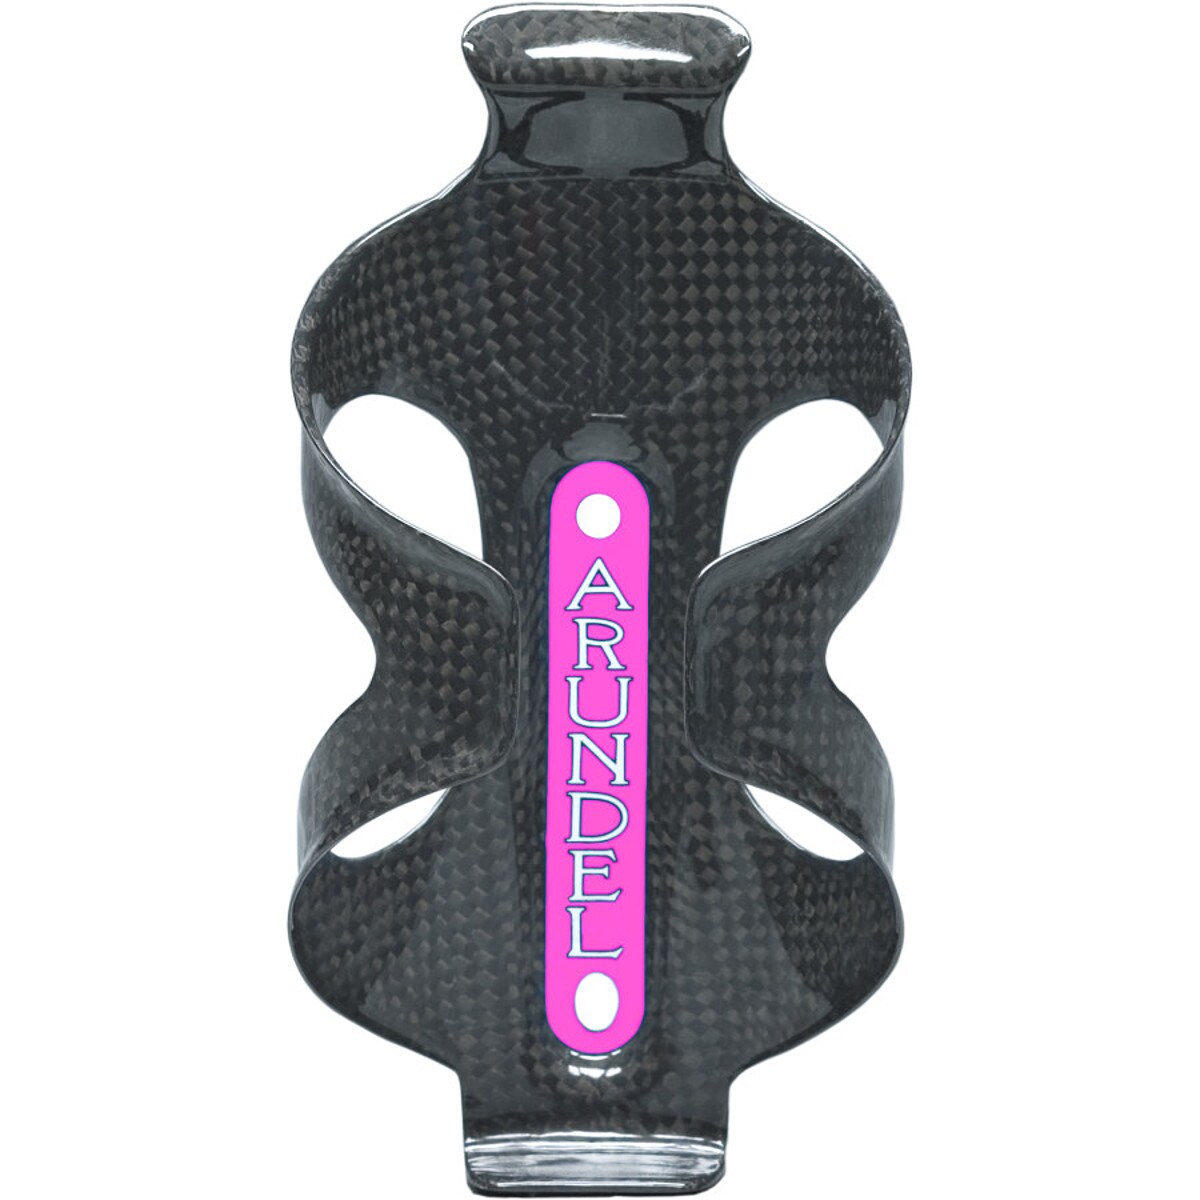 Arundel Dave-O Water Water Bottle Cage